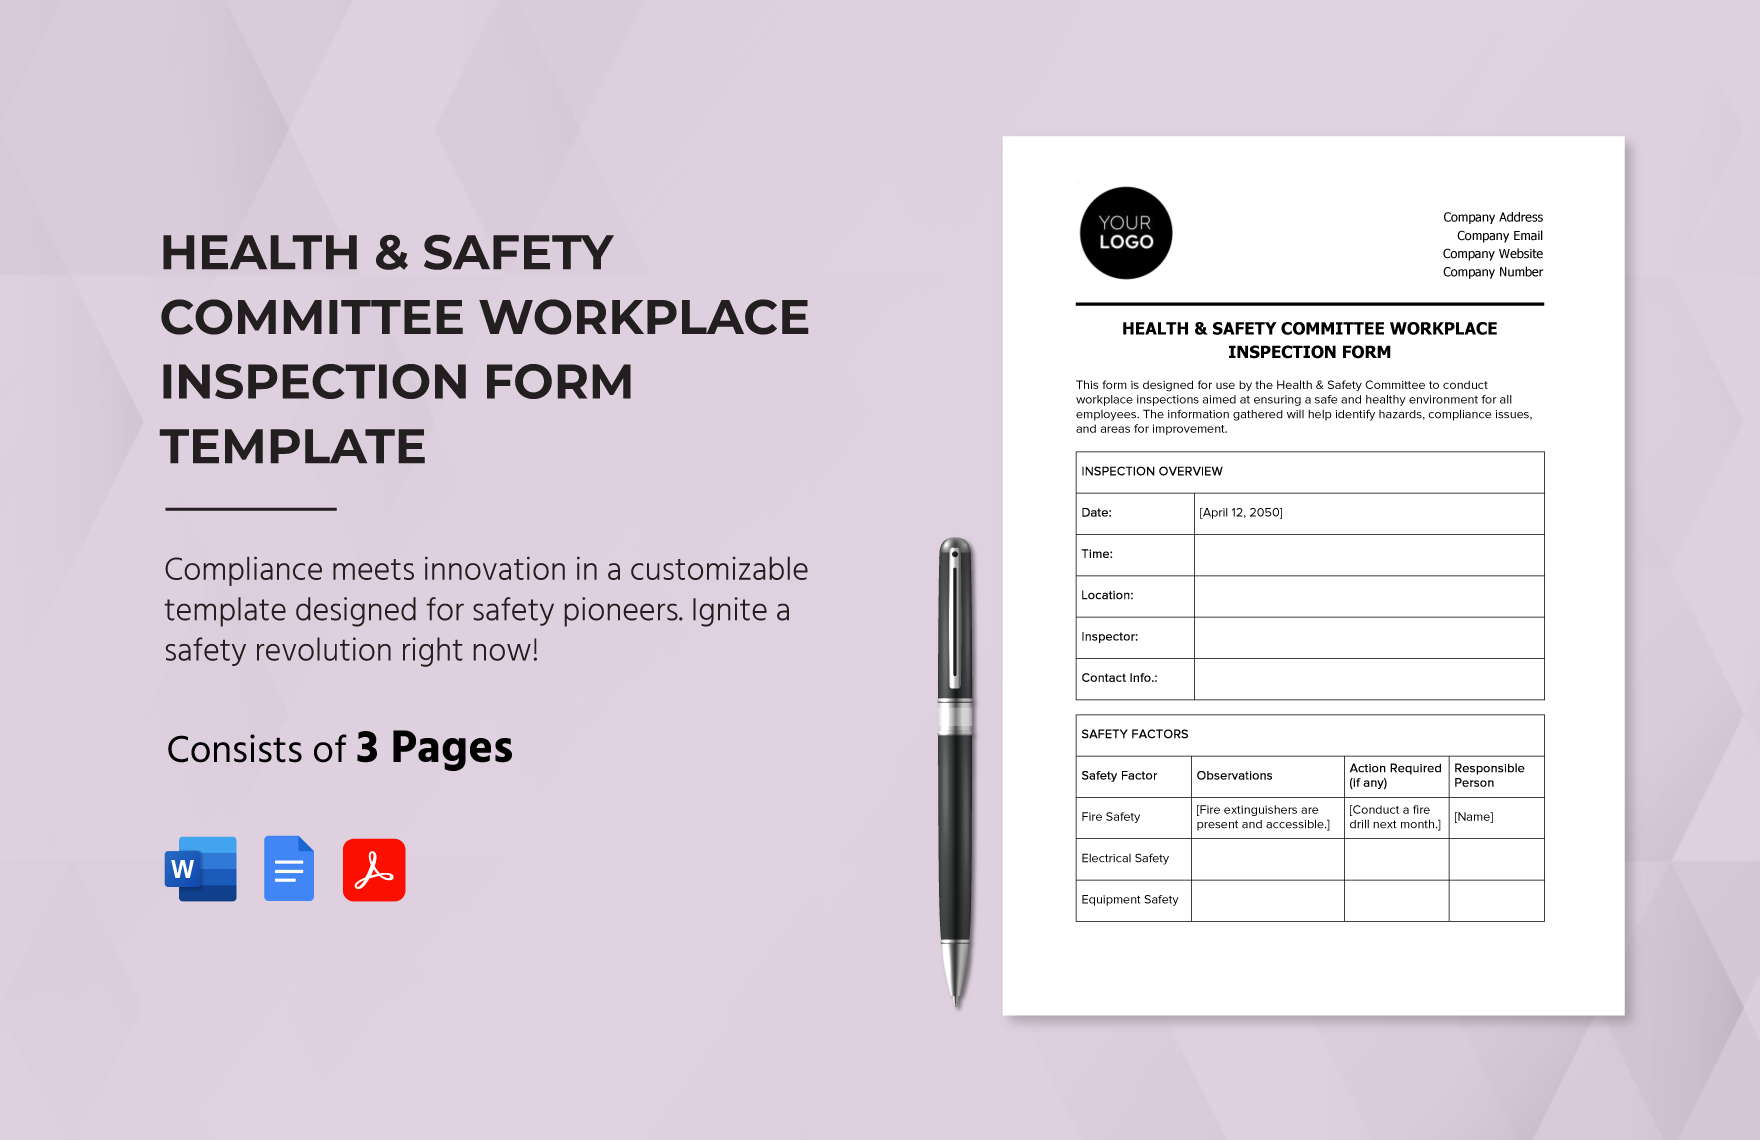 Health & Safety Committee Workplace Inspection Form Template